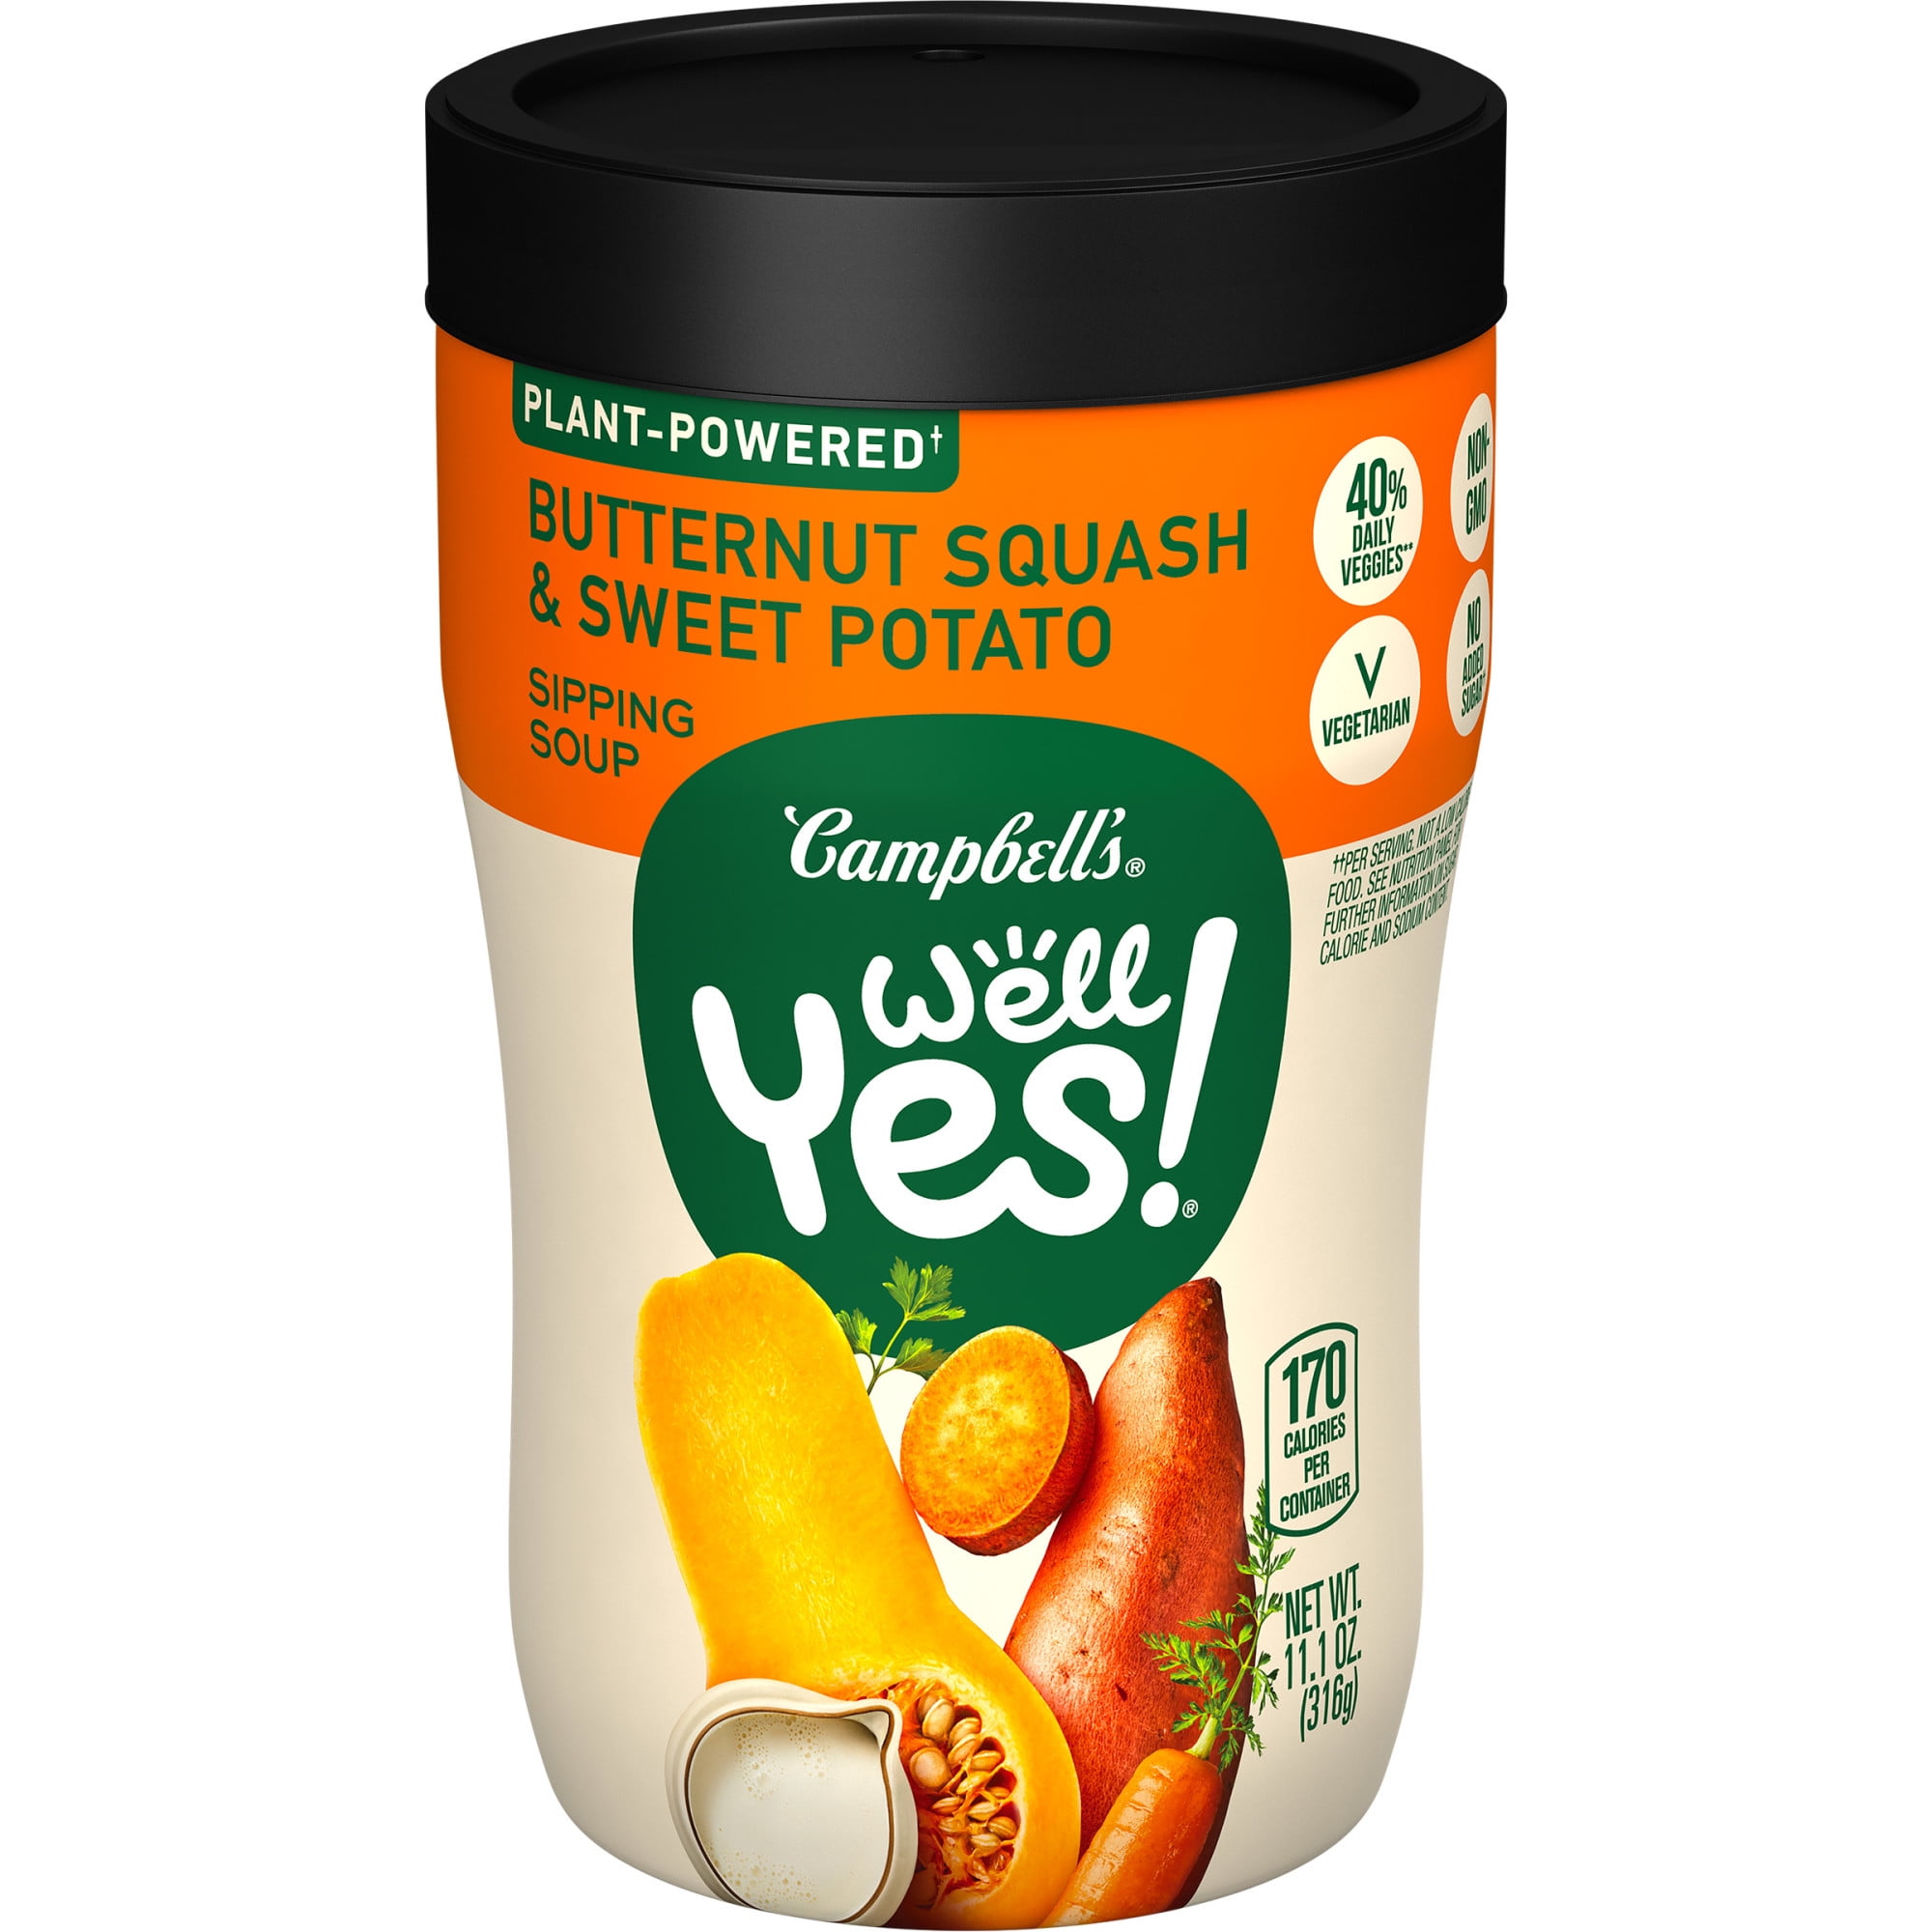 Campbell's Well Yes! Sipping Soup, Ready to Serve Butternut Squash and Sweet Potato Soup, Vegetarian Soup, 11.1 Oz Microwavable Cup